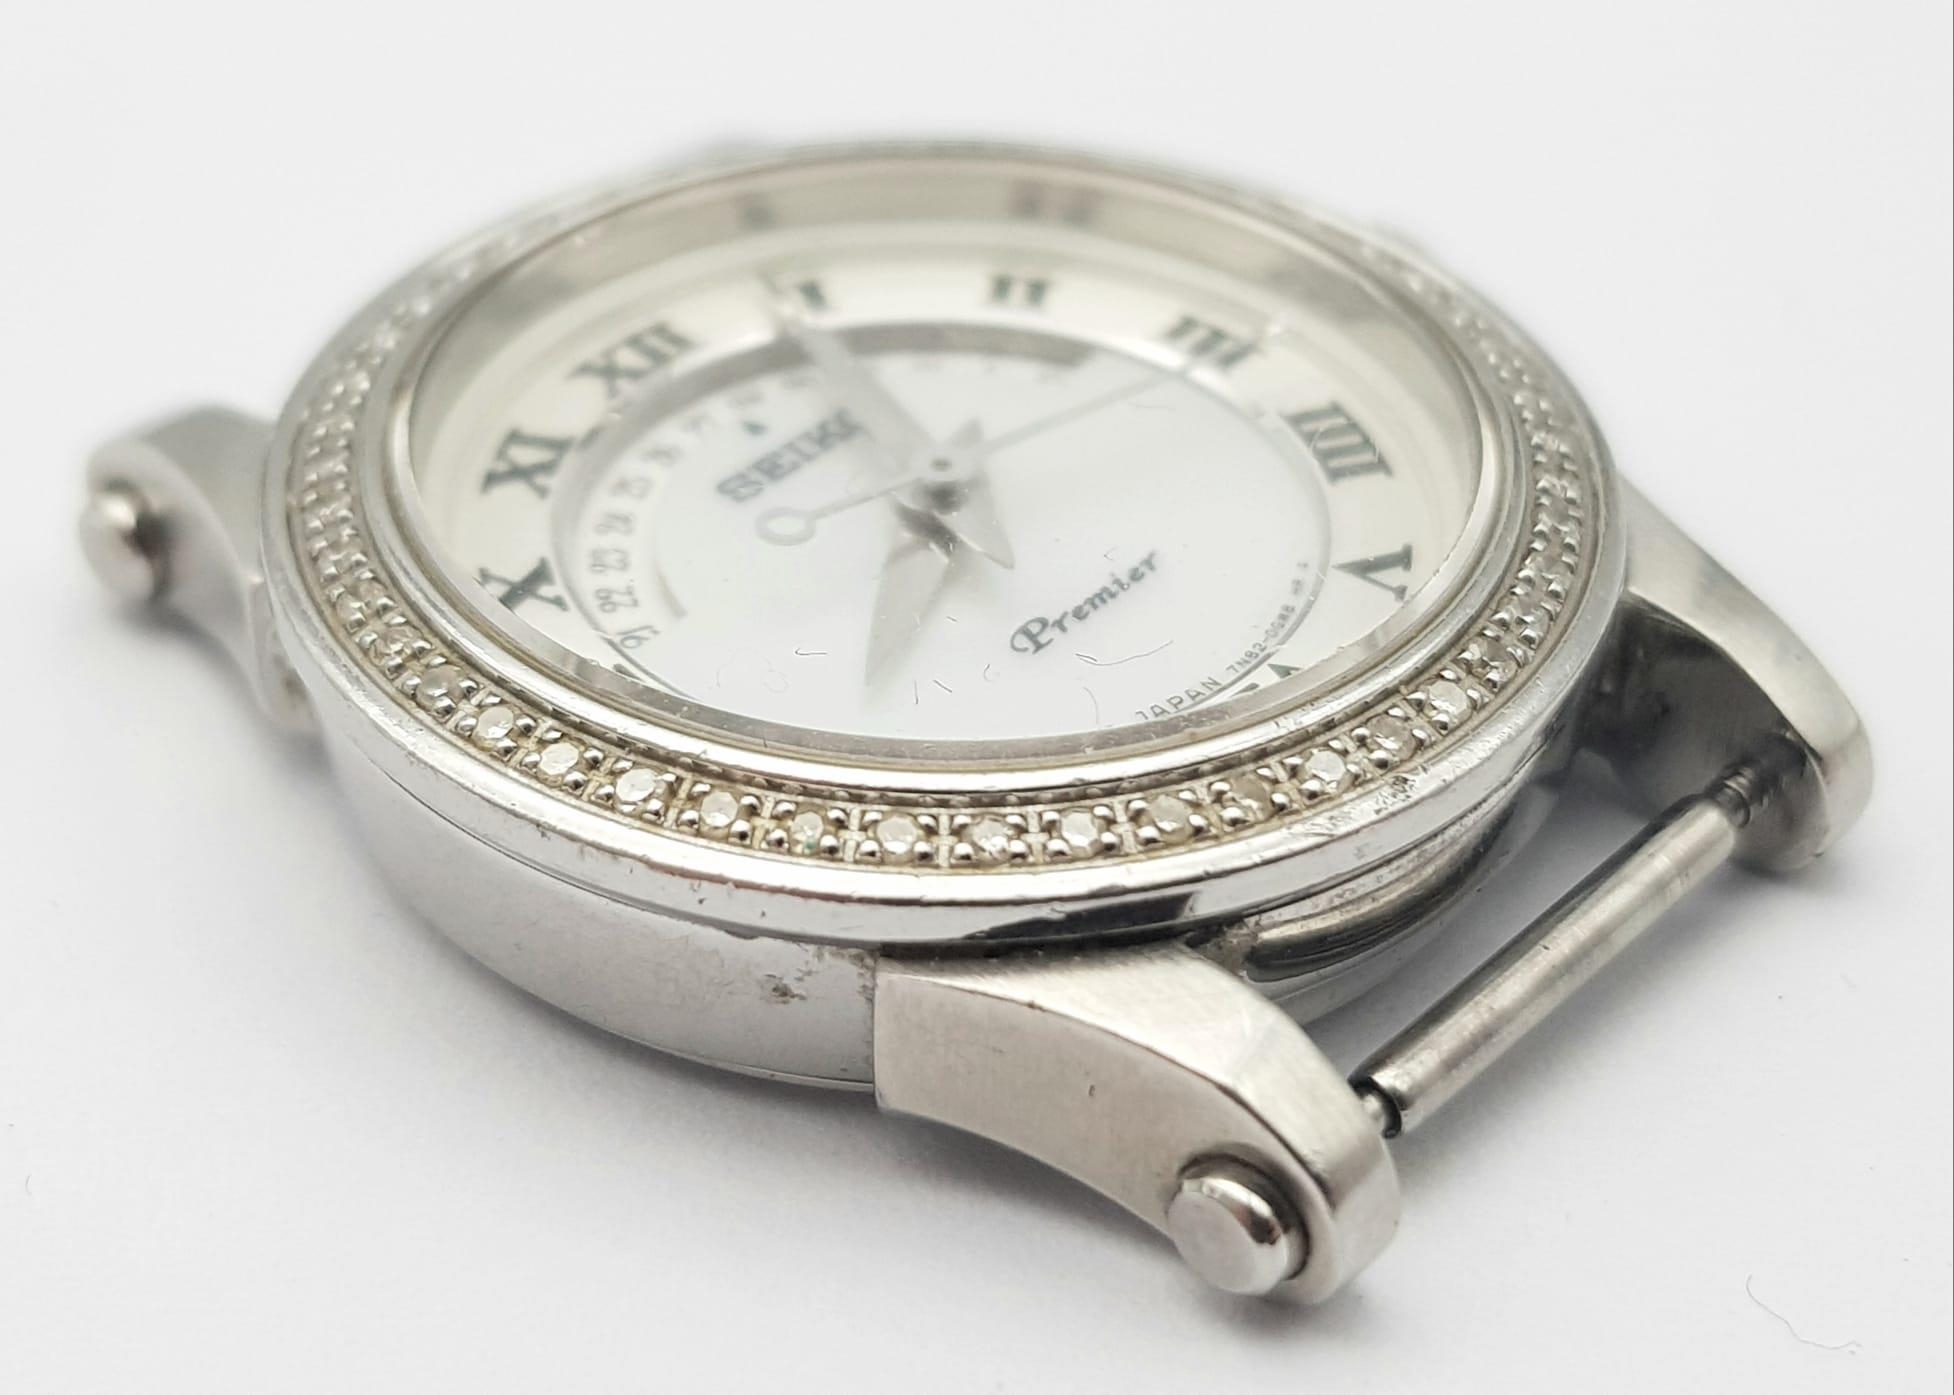 A Seiko Premier Ladies Diamond Watch Case. 27mm. Diamond bezel. Mother of pearl dial. In working - Image 2 of 7